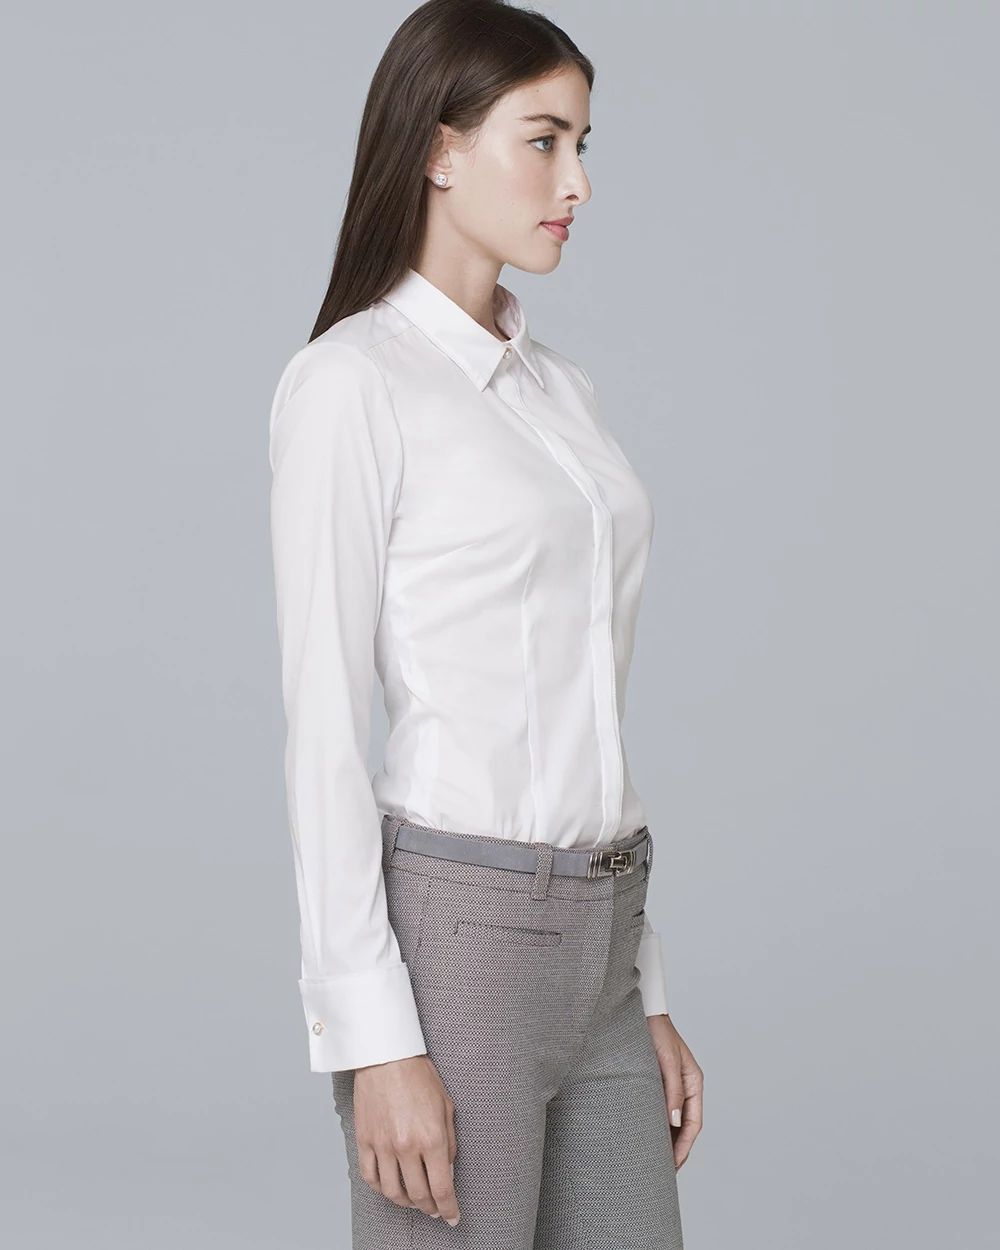 Classic Poplin Shirt click to view larger image.